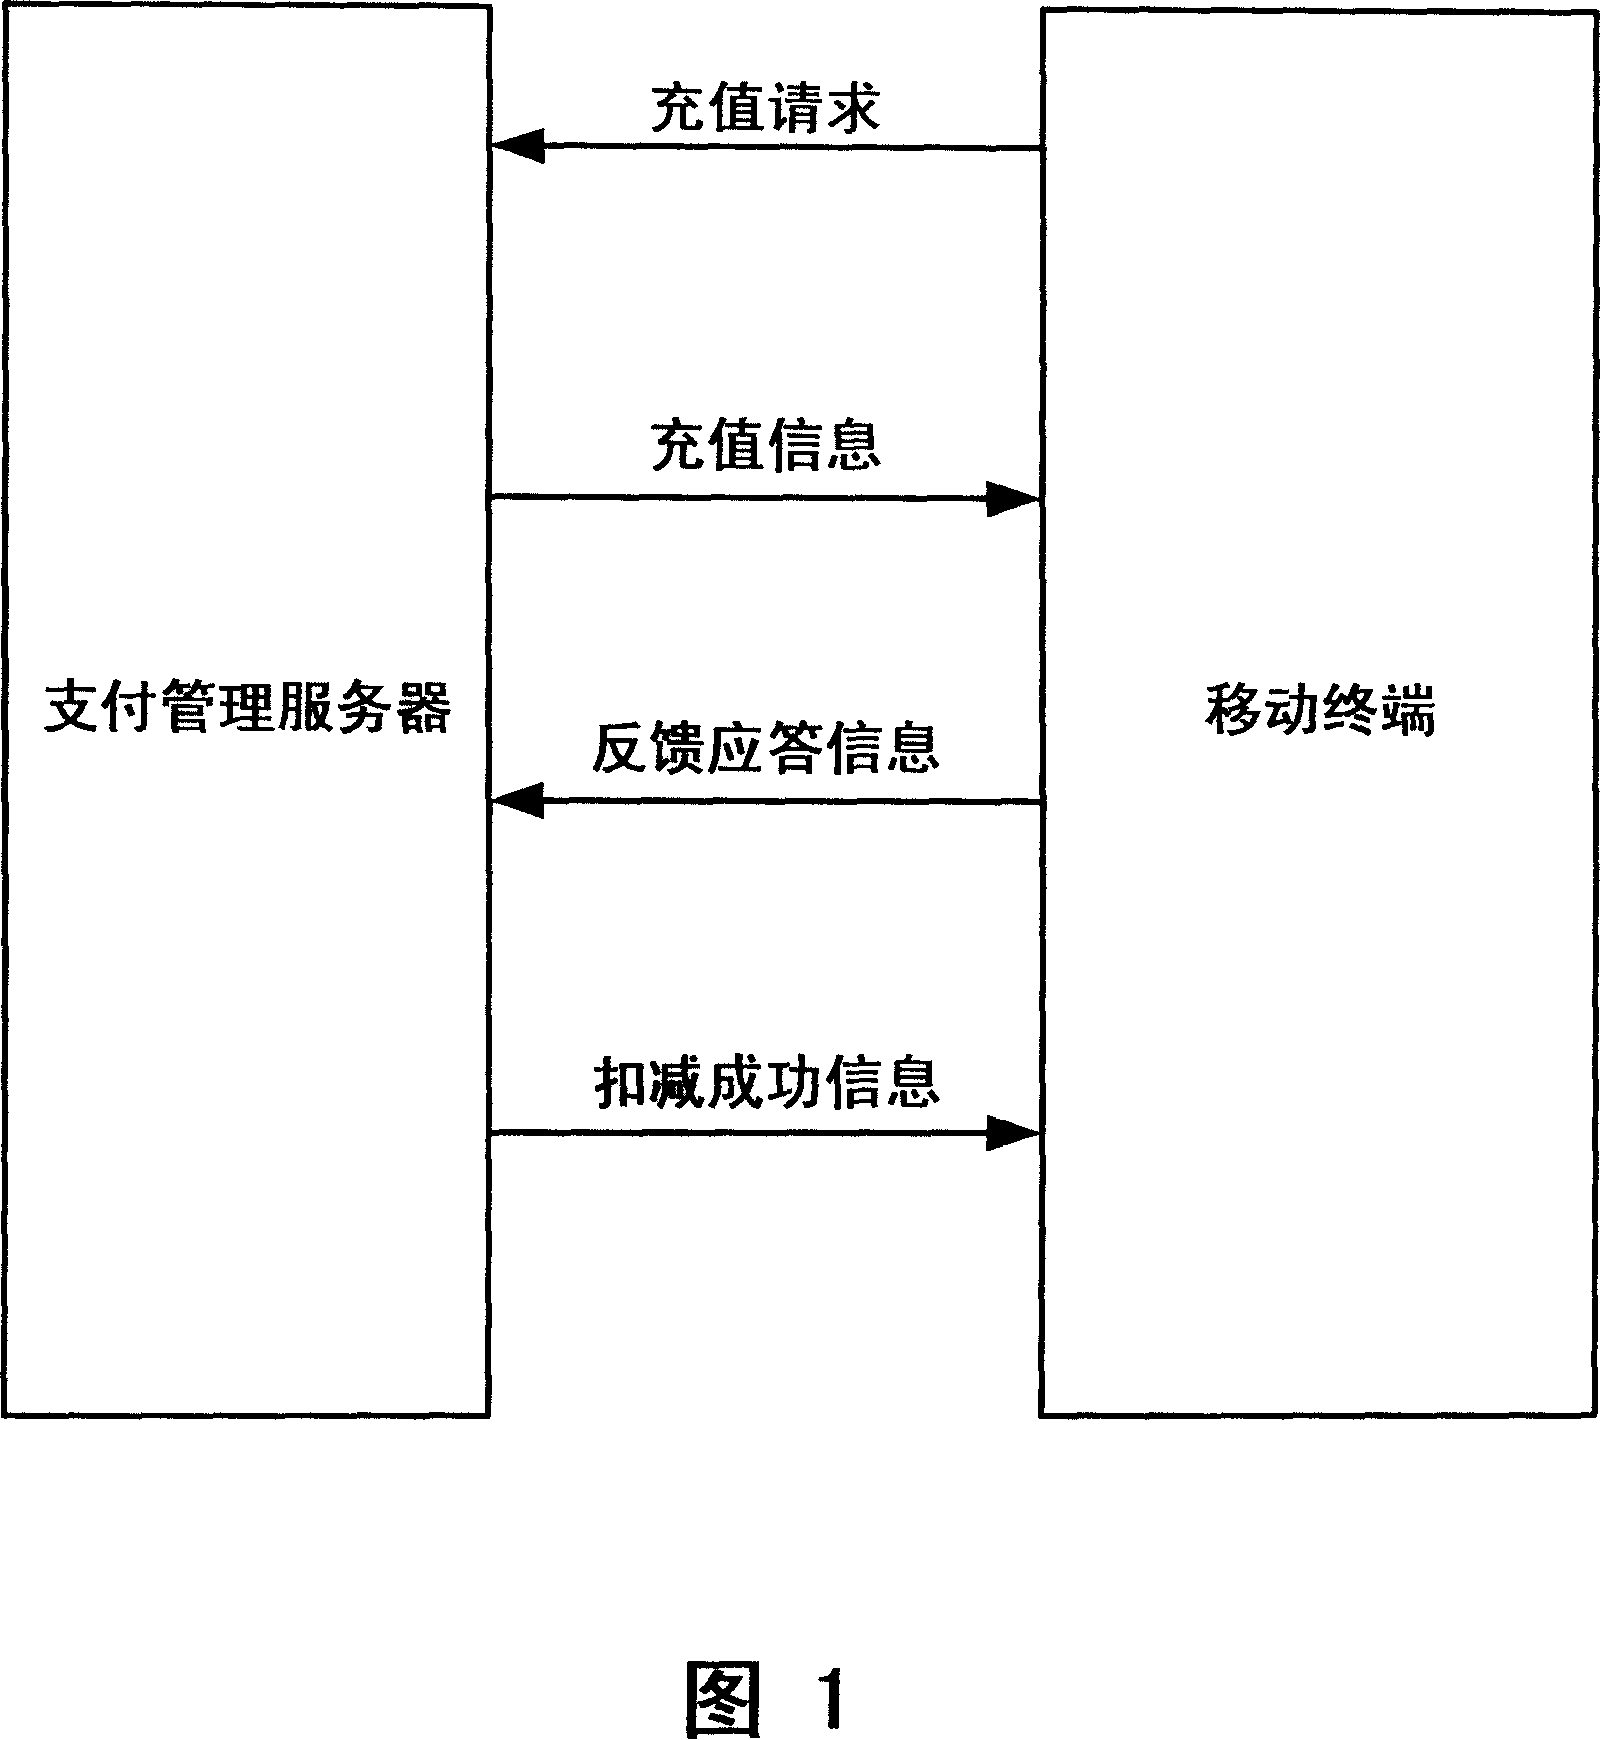 Security authentication system, device and method for electric cash charge of mobile paying device